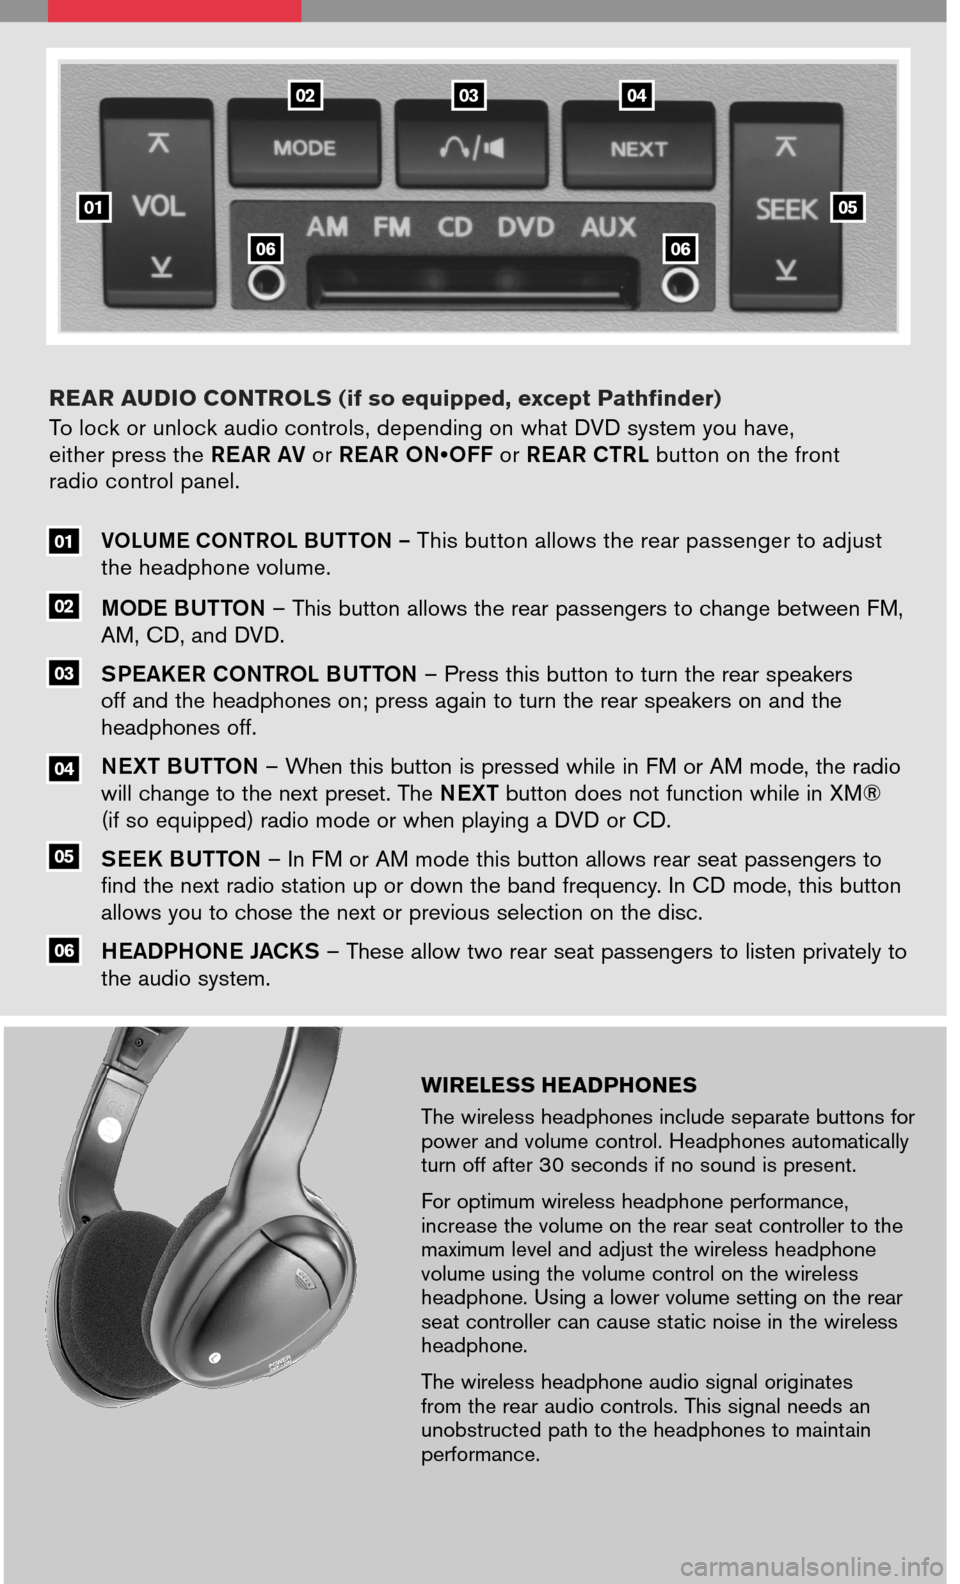 NISSAN MAXIMA 2008 A34 / 6.G Entertainment Syst 
WIRELESS HEADPHONES
The wireless headphones include separate buttons for power and volume control. Headphones automatically turn off after 30 seconds if no sound is present.
For optimum wireless head